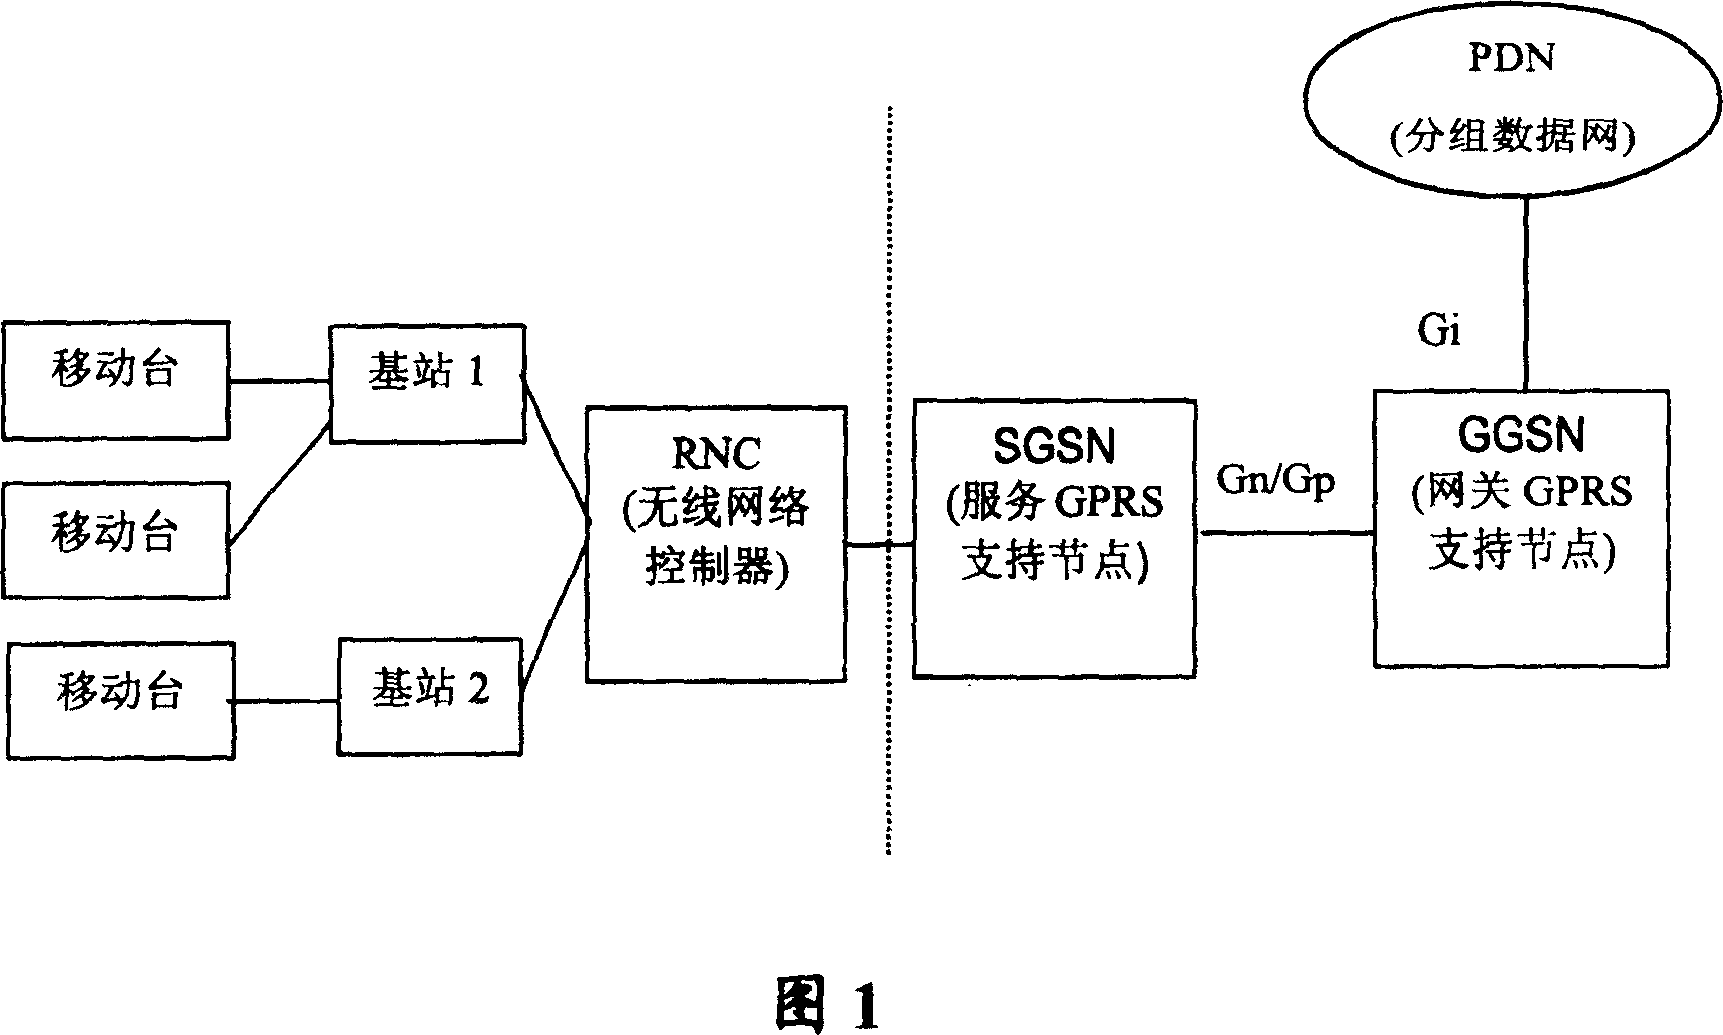 Method for detecting interface connectivity between GTP support protecol terminal equipments